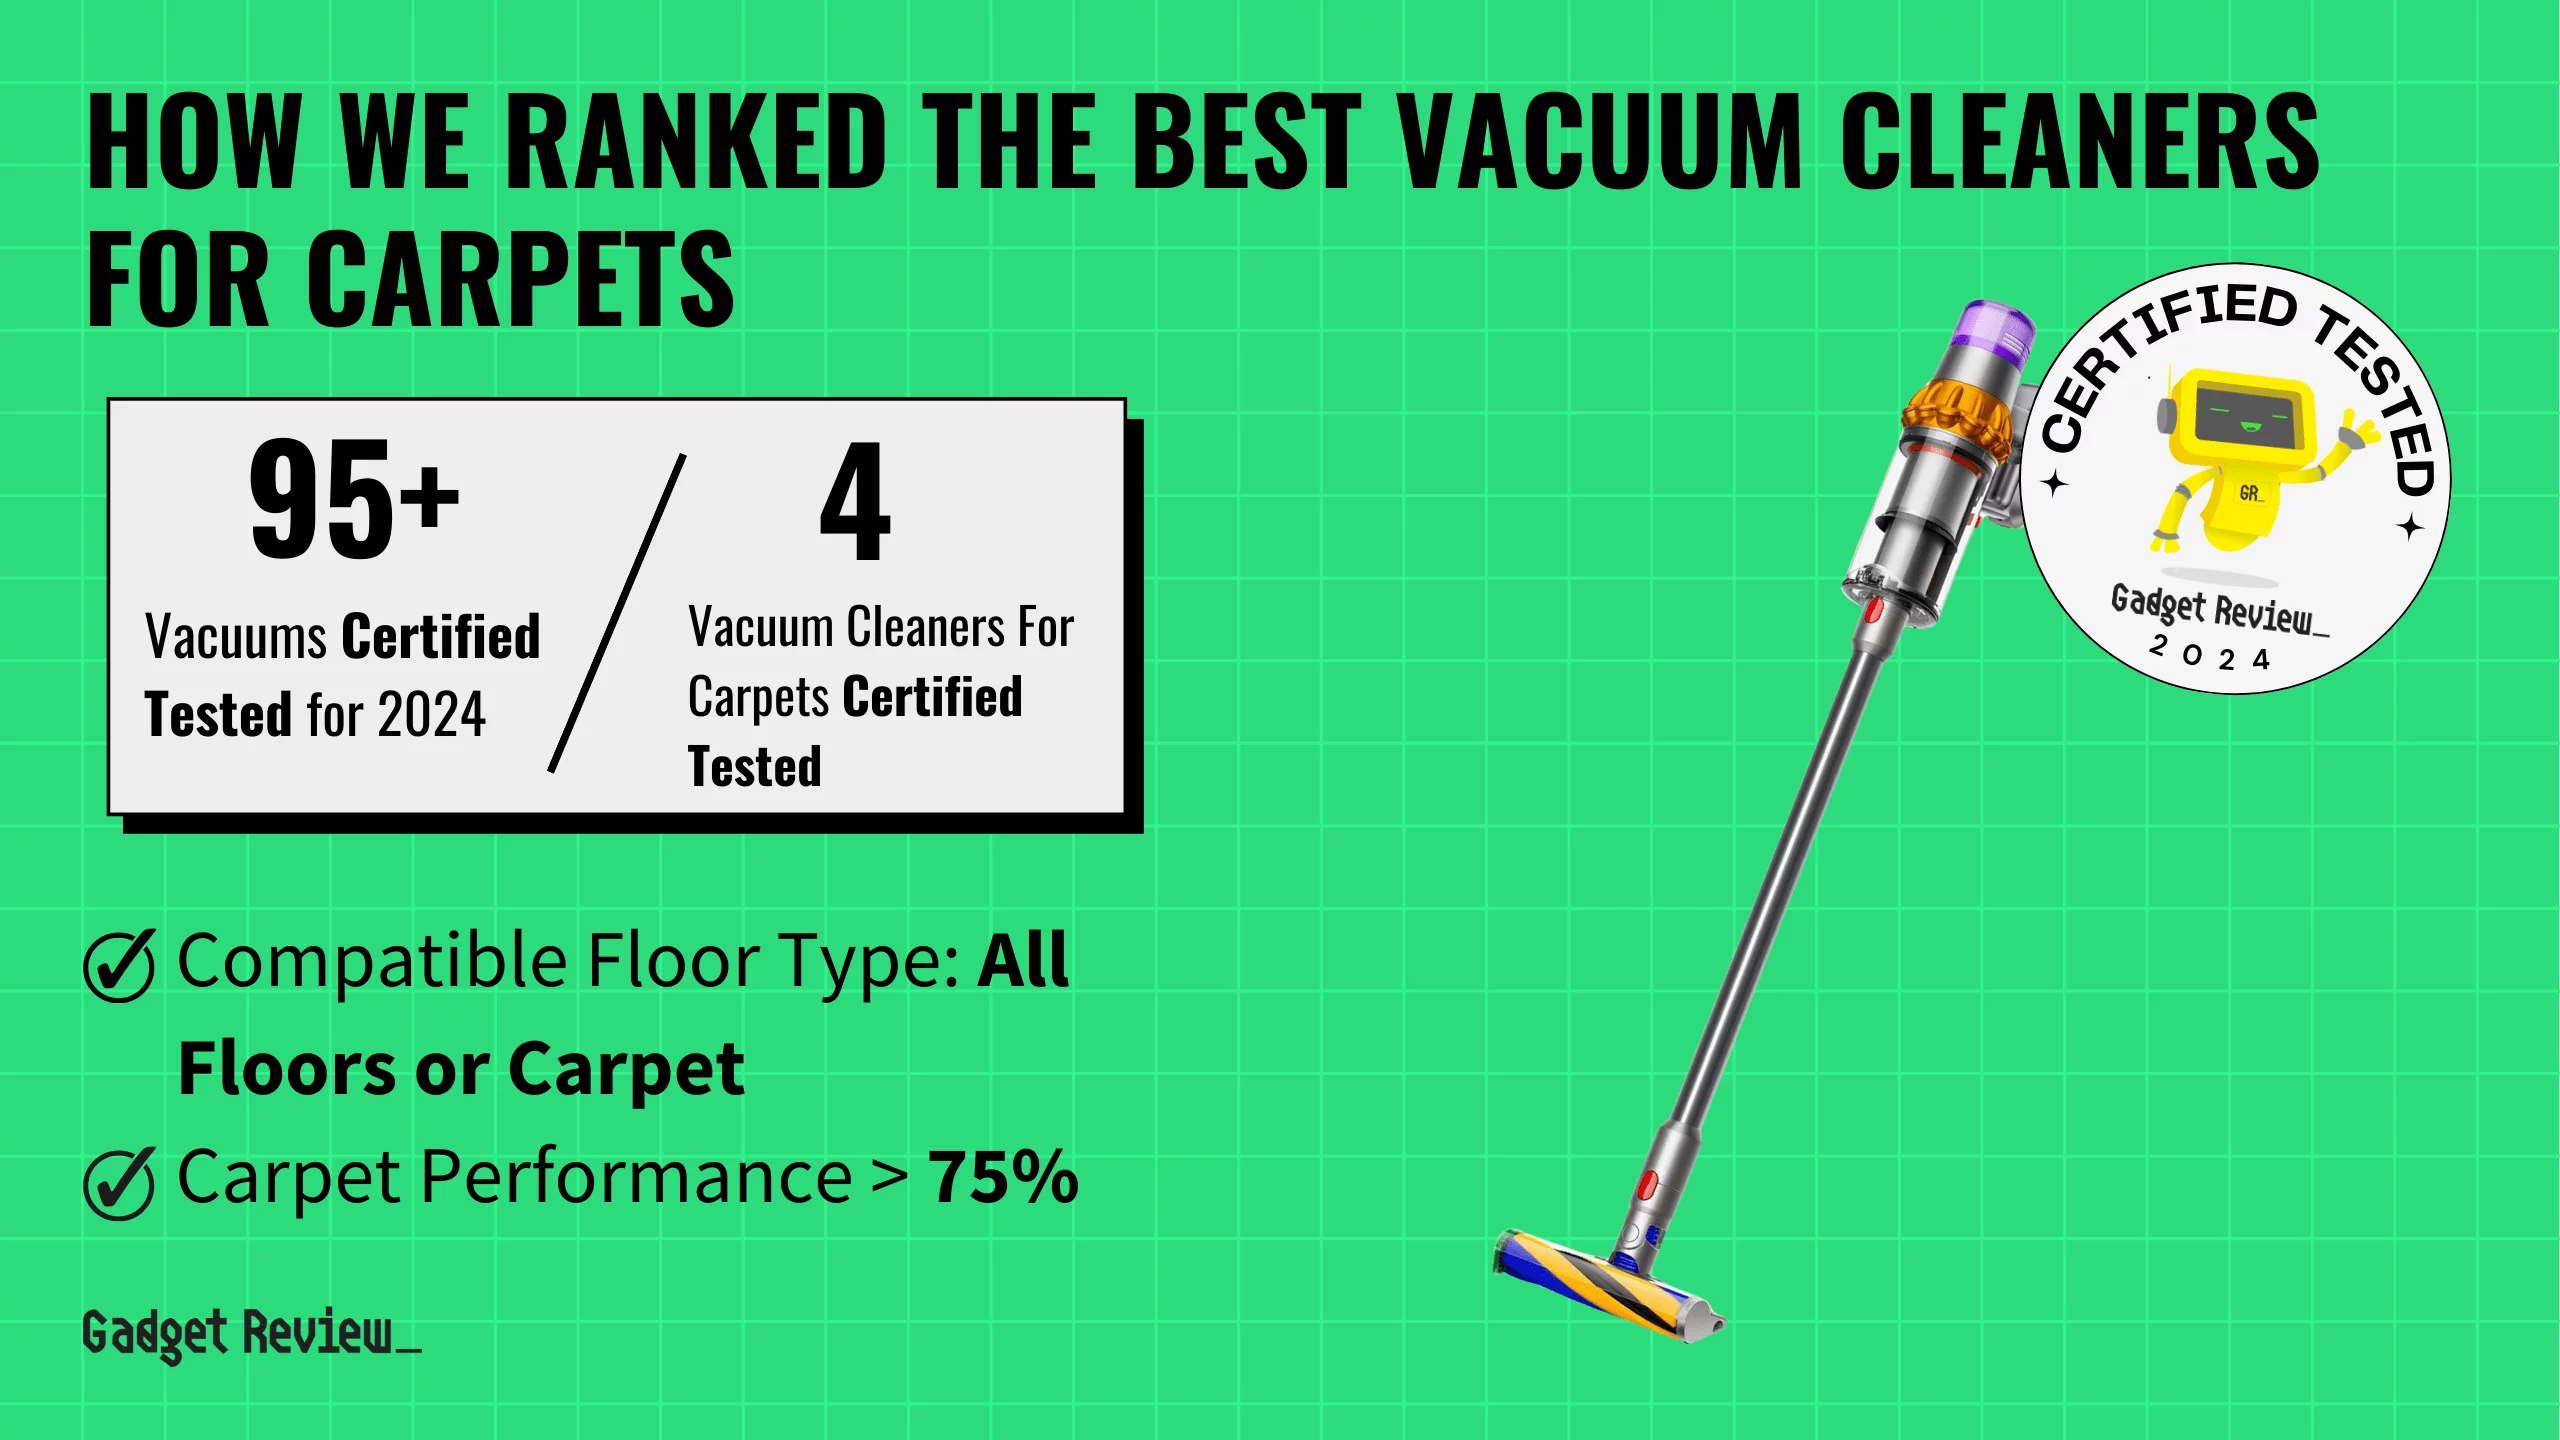 What’s the Best Vacuum Cleaner for Carpets? 4 Options Ranked